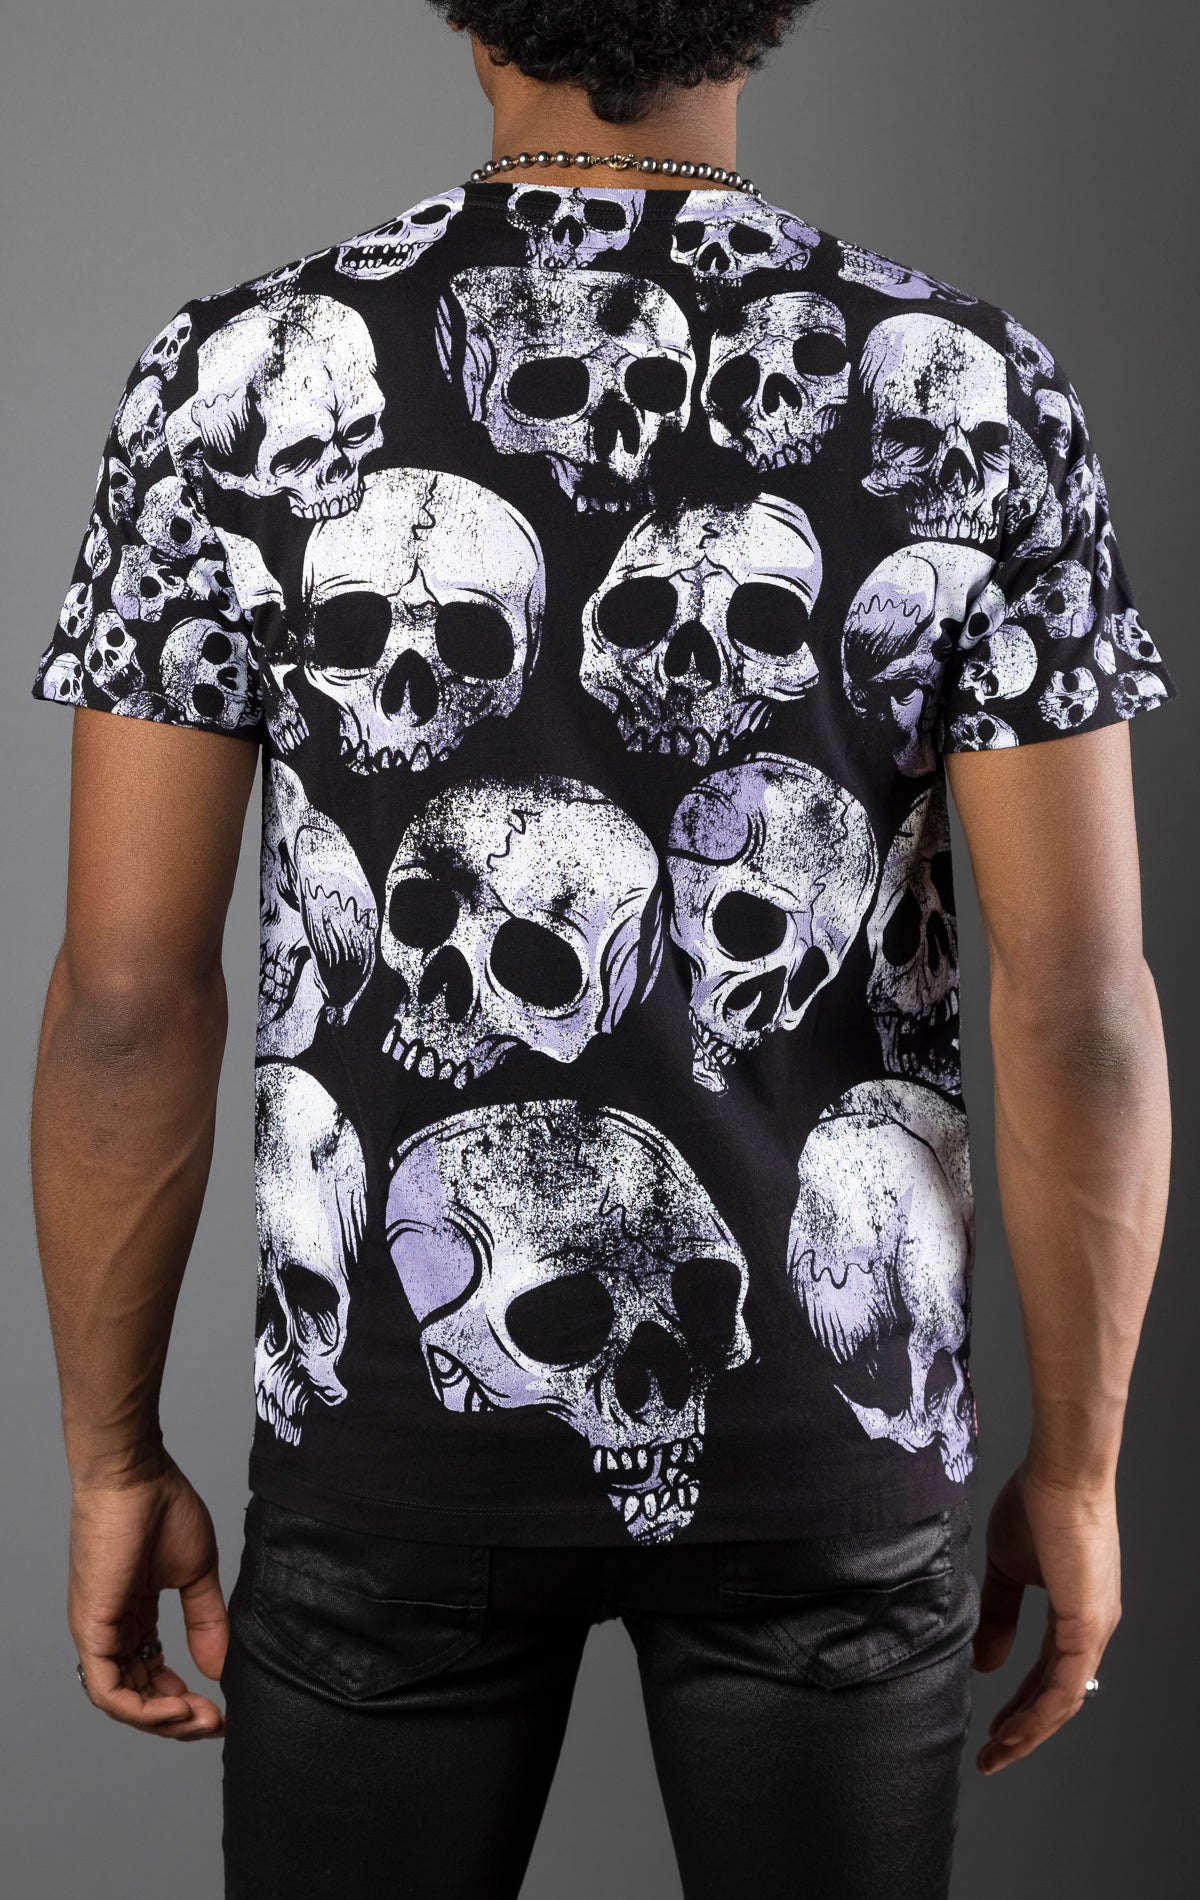 Black cotton tee with distressed all-over repeat skull print